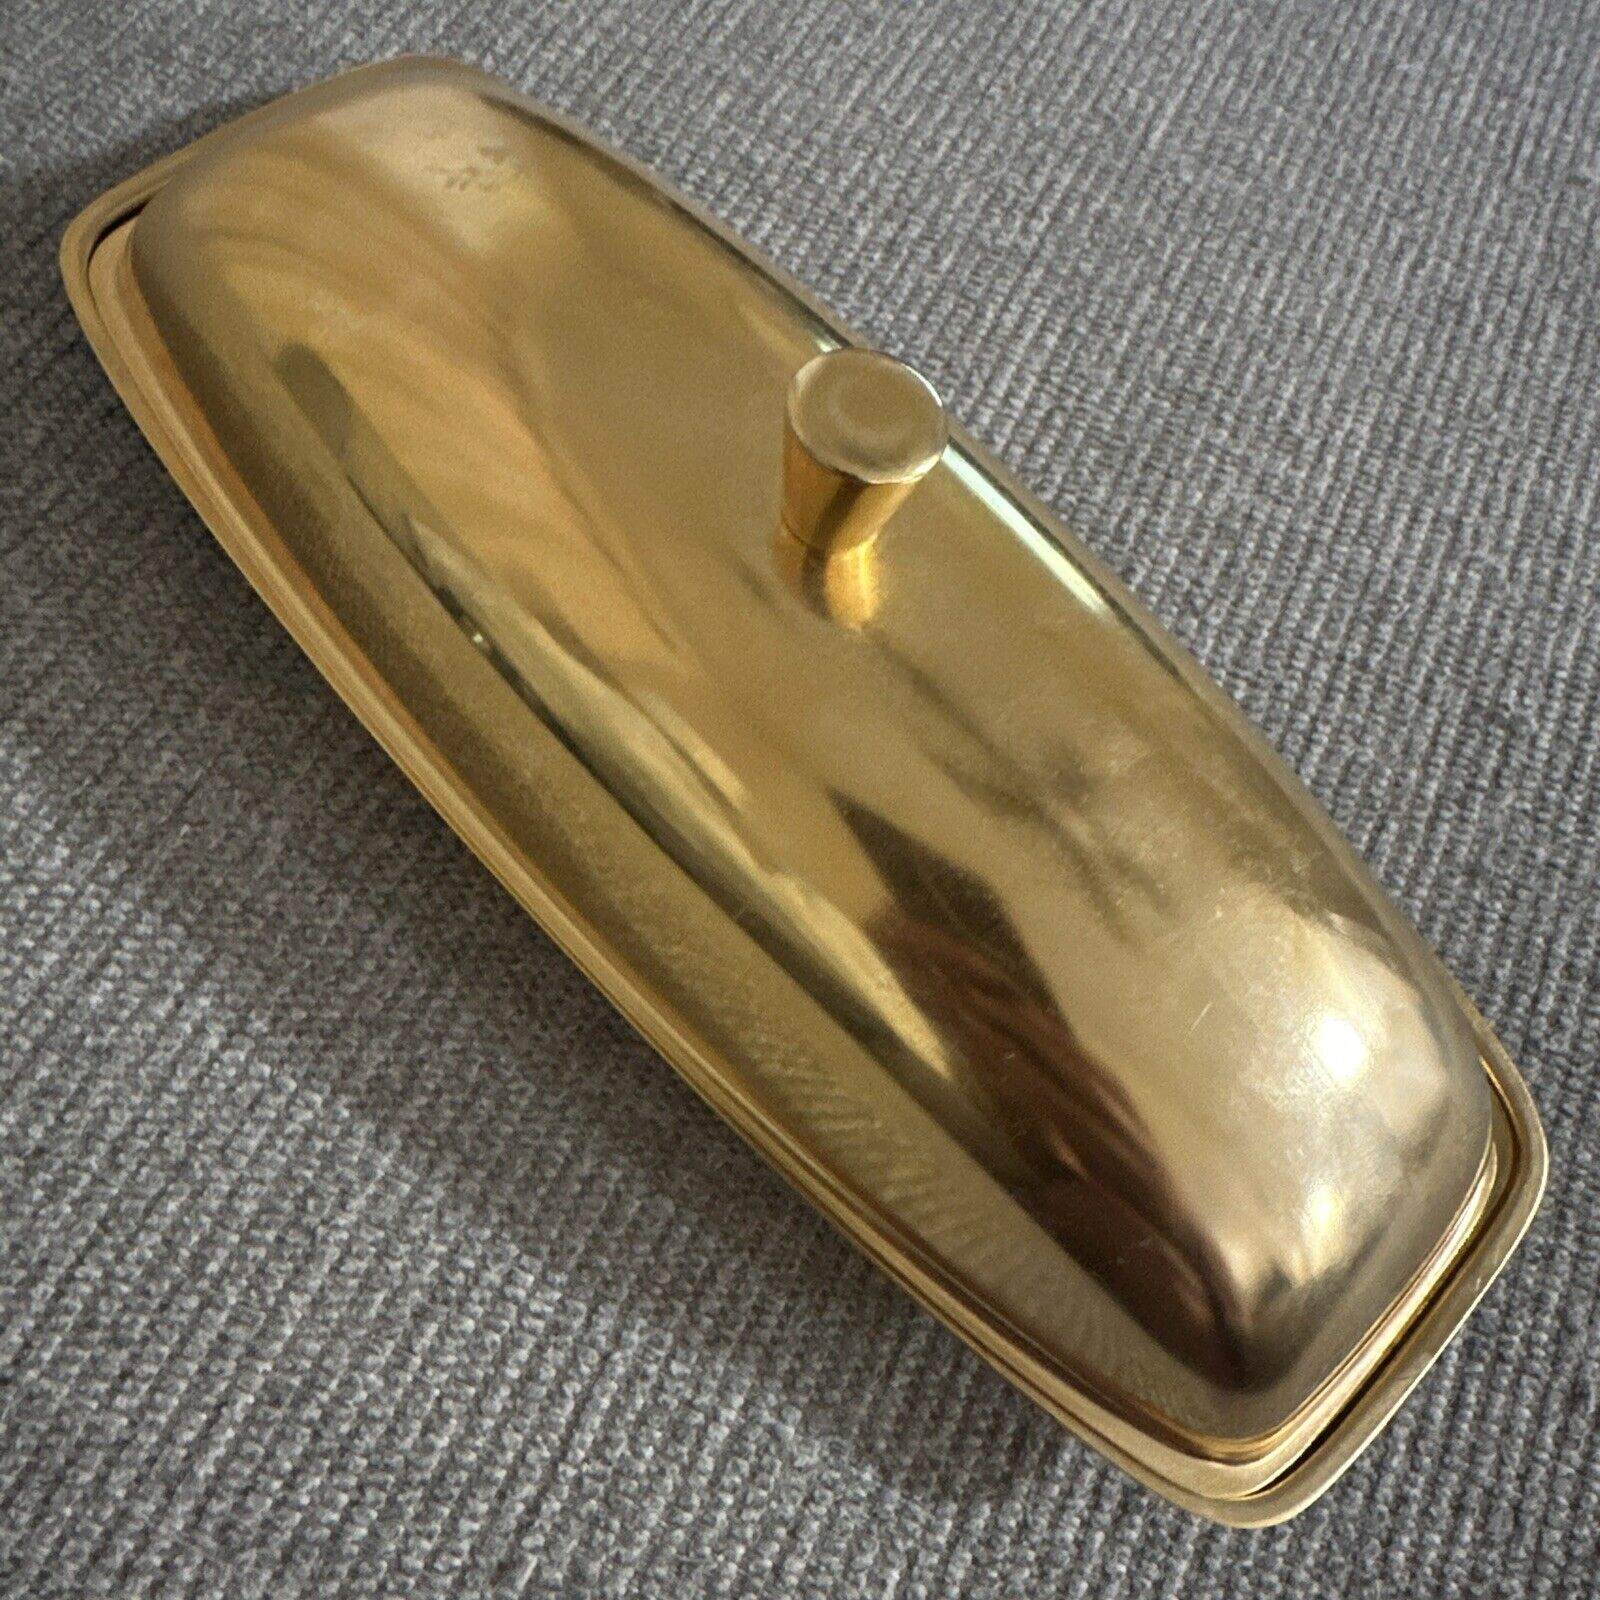 VINTAGE Lifetime Japan 24K Gold Electroplated Butter Dish with Lid - Beautiful